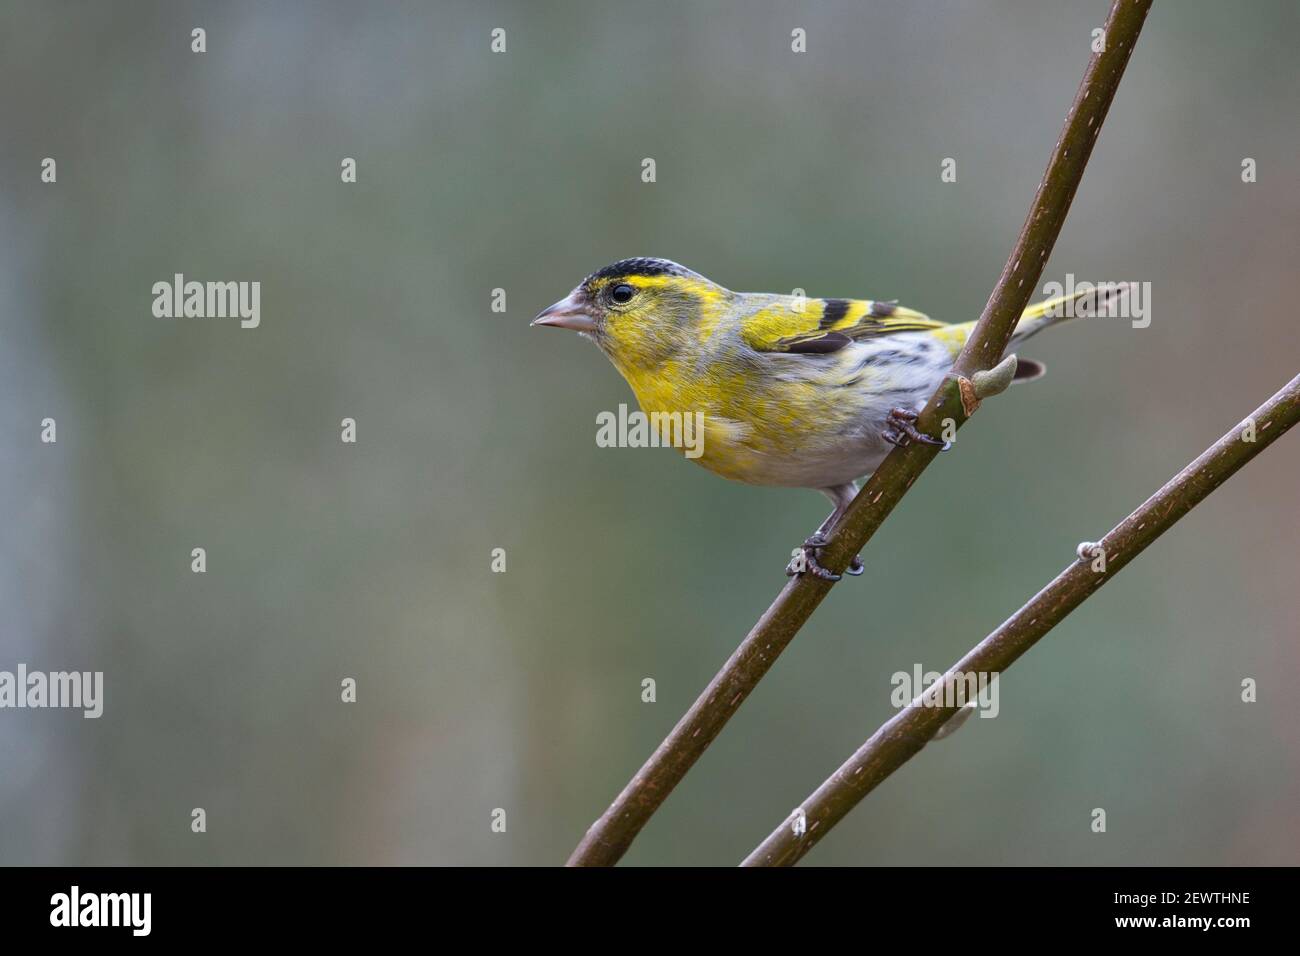 Adult male Eurasian siskin (Carduelis spinus) perched in a garden tree Stock Photo